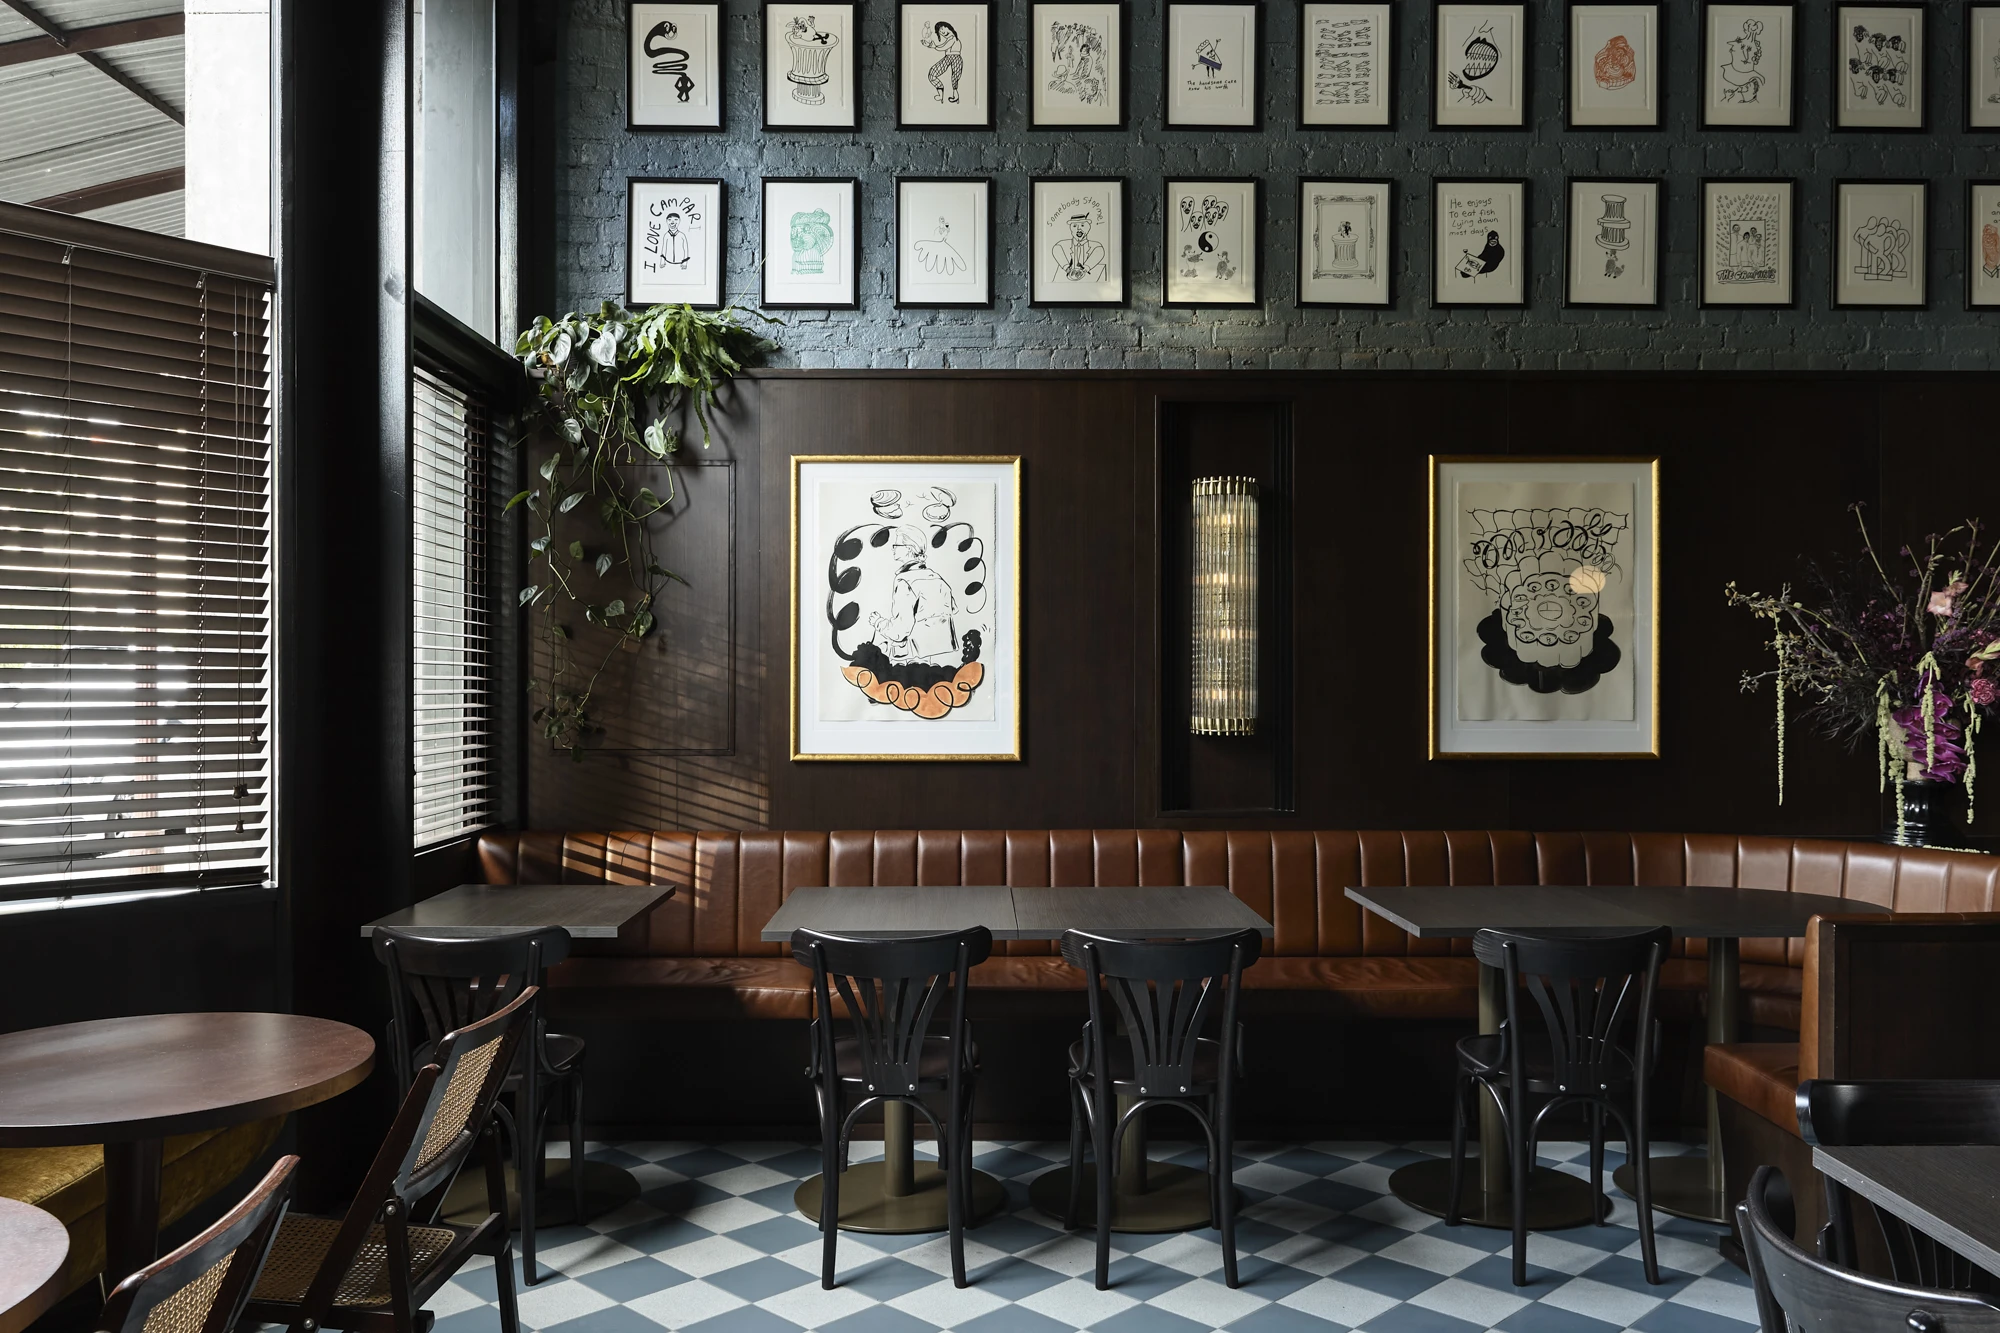 Dark-walled restaurant with artwork, leather banquette and black and white checkered floor